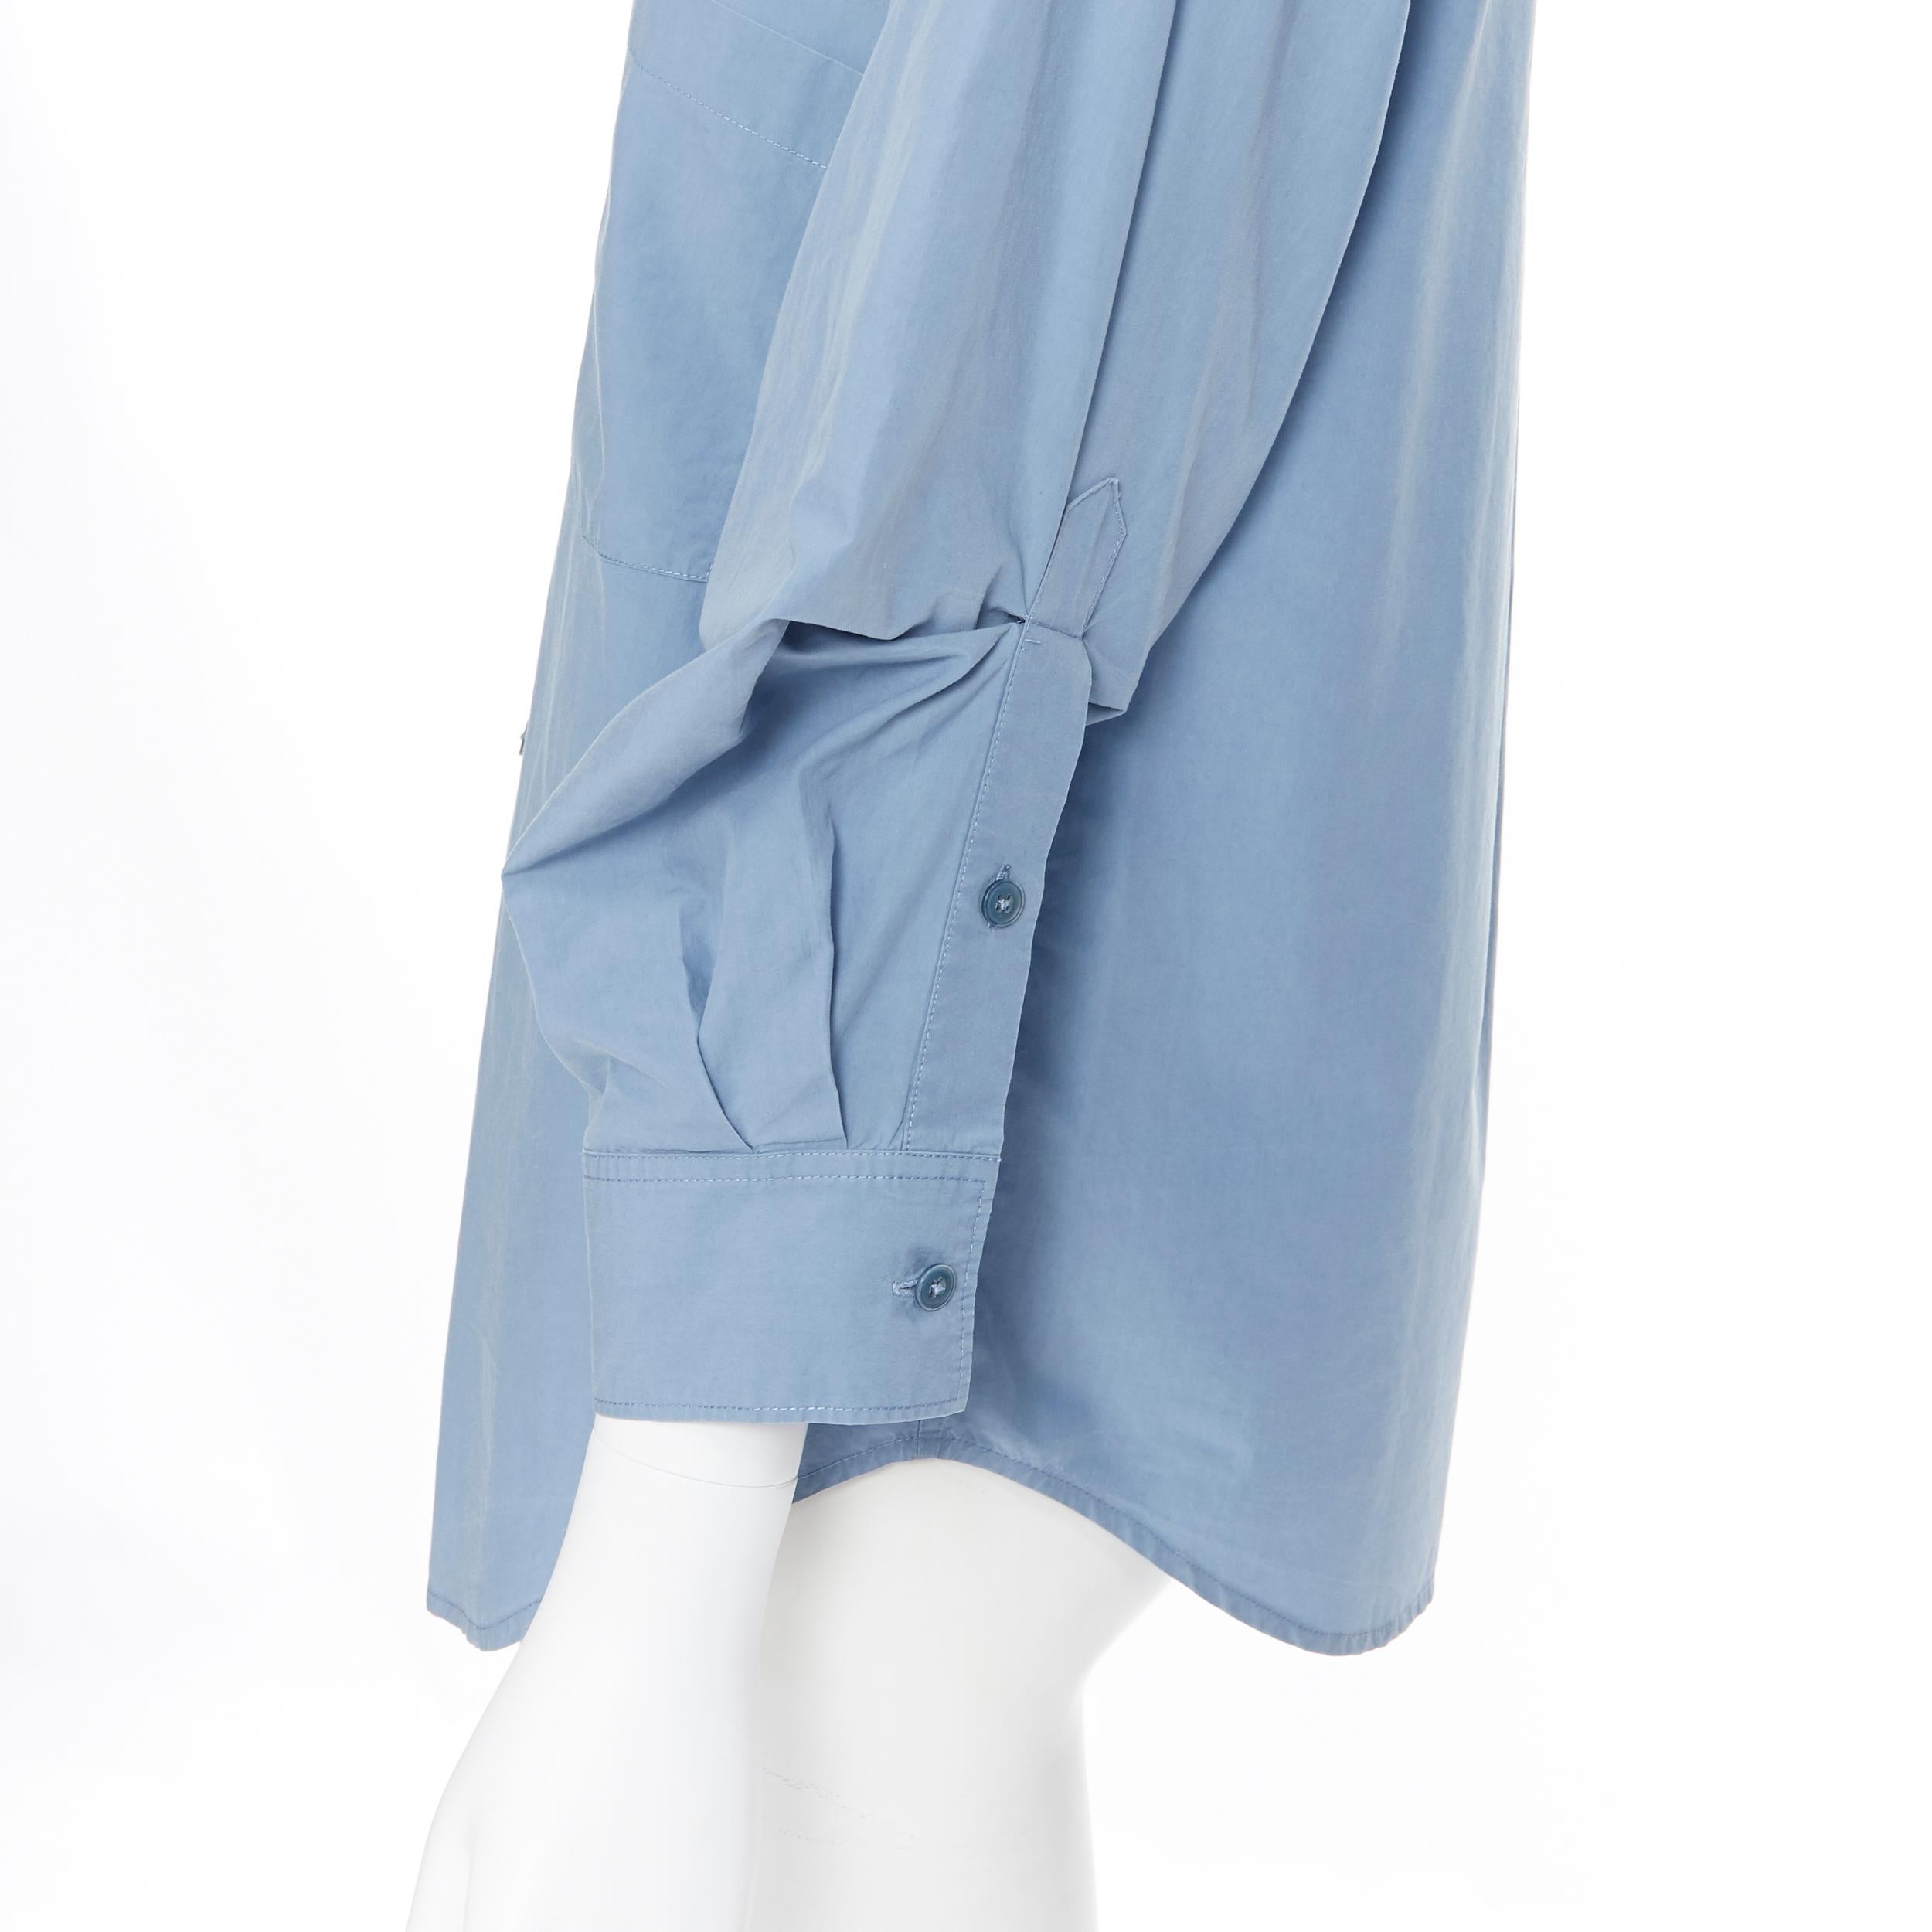 DONNA KARAN blue cotton oversized boxy nipped 3/4 sleeves casual shirt XS
Brand: Donna Karan
Designer: Donna Karan
Model Name / Style: Boxy shirt
Material: Cotton
Color: Blue
Pattern: Solid
Closure: Button
Extra Detail: Nipped detail on cuff for